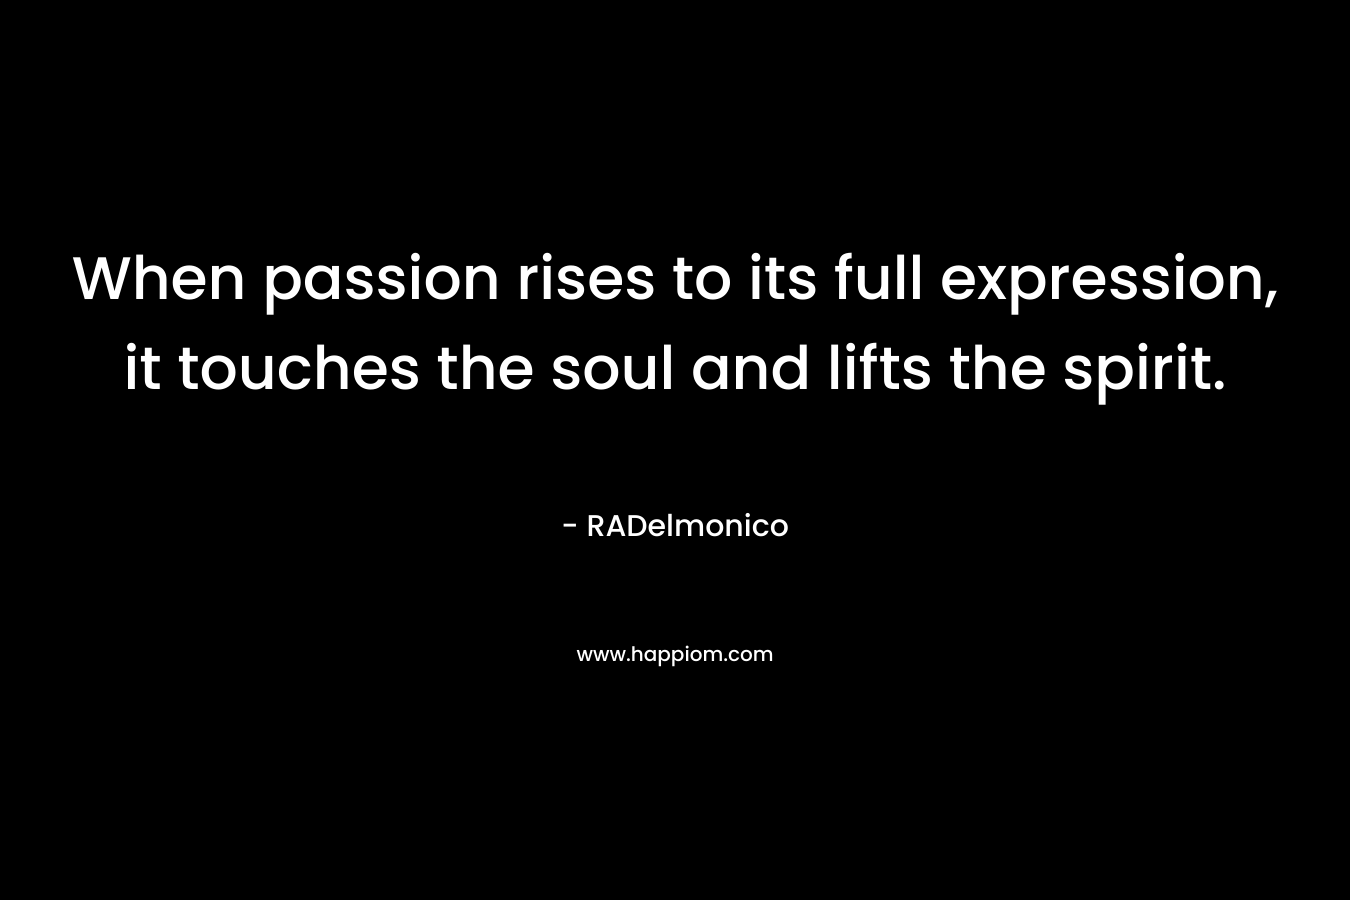 When passion rises to its full expression, it touches the soul and lifts the spirit.